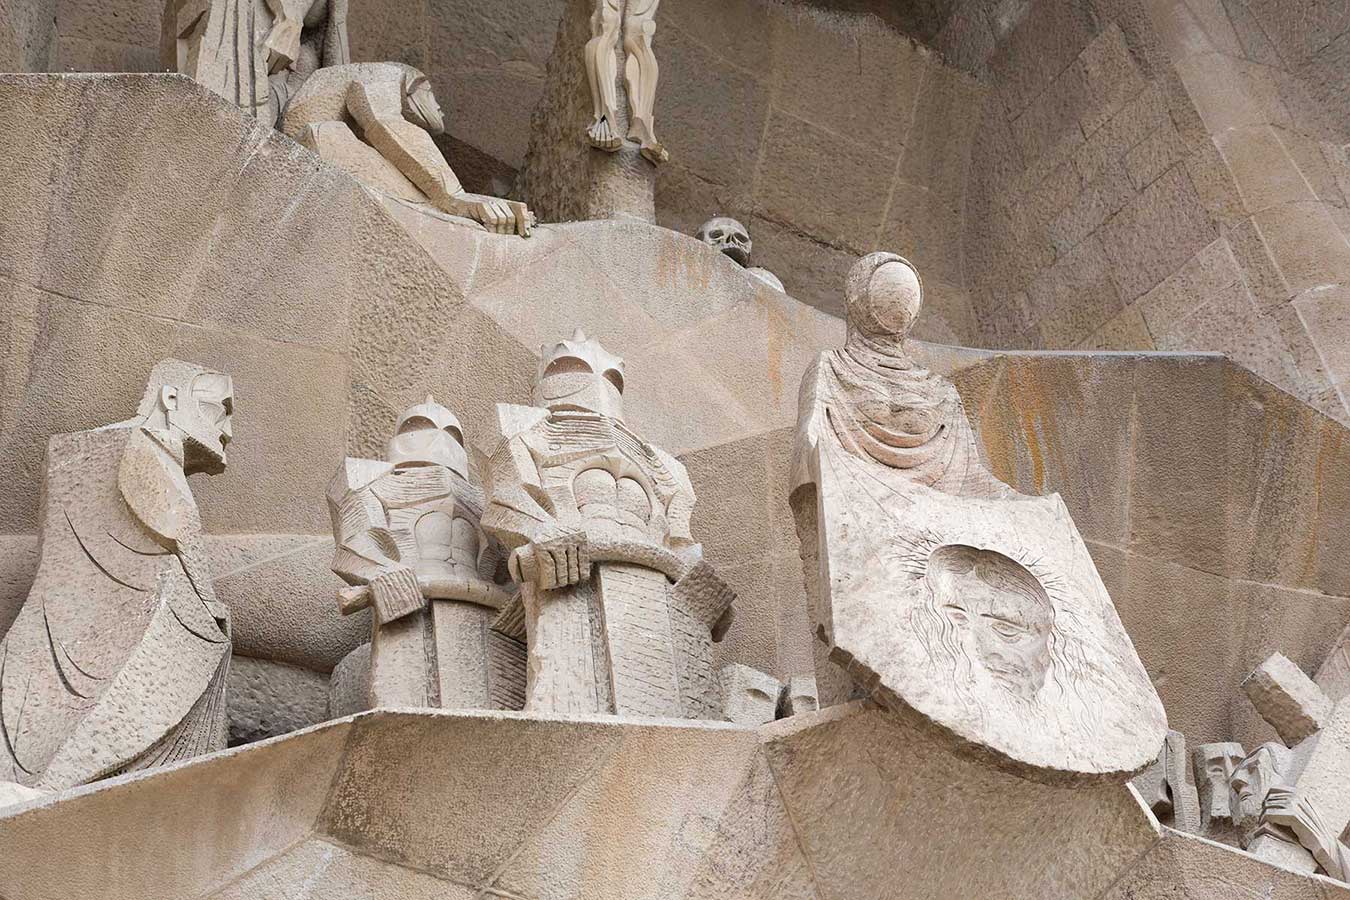 Sagrada Familia: Veronica and Roman soldiers with ressemblance of stormtroppers, Star Wars